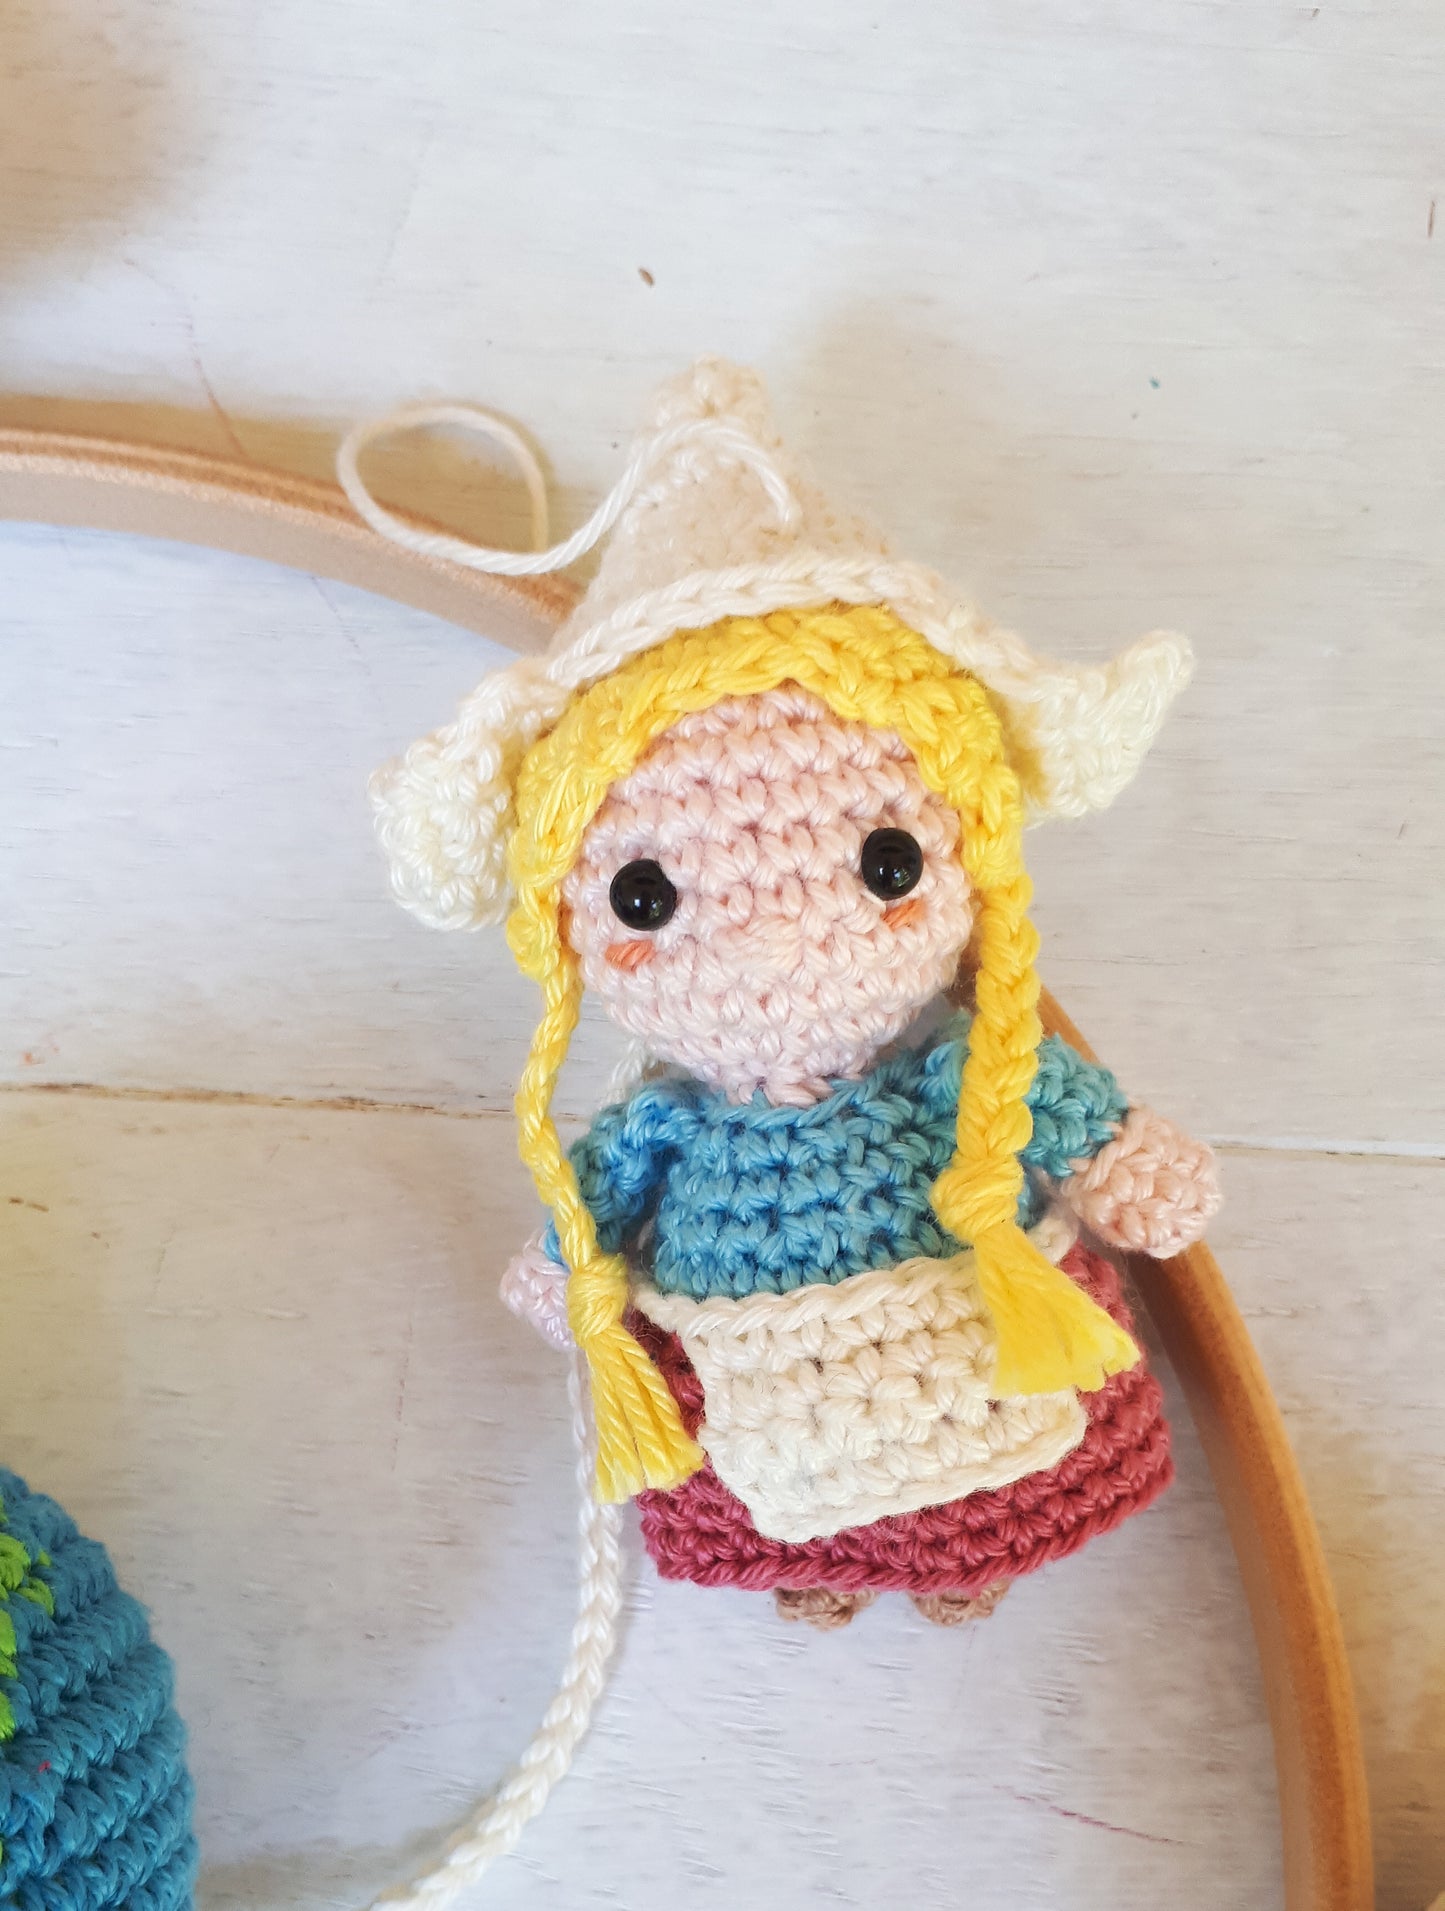 It's a small world baby mobile crochet pattern